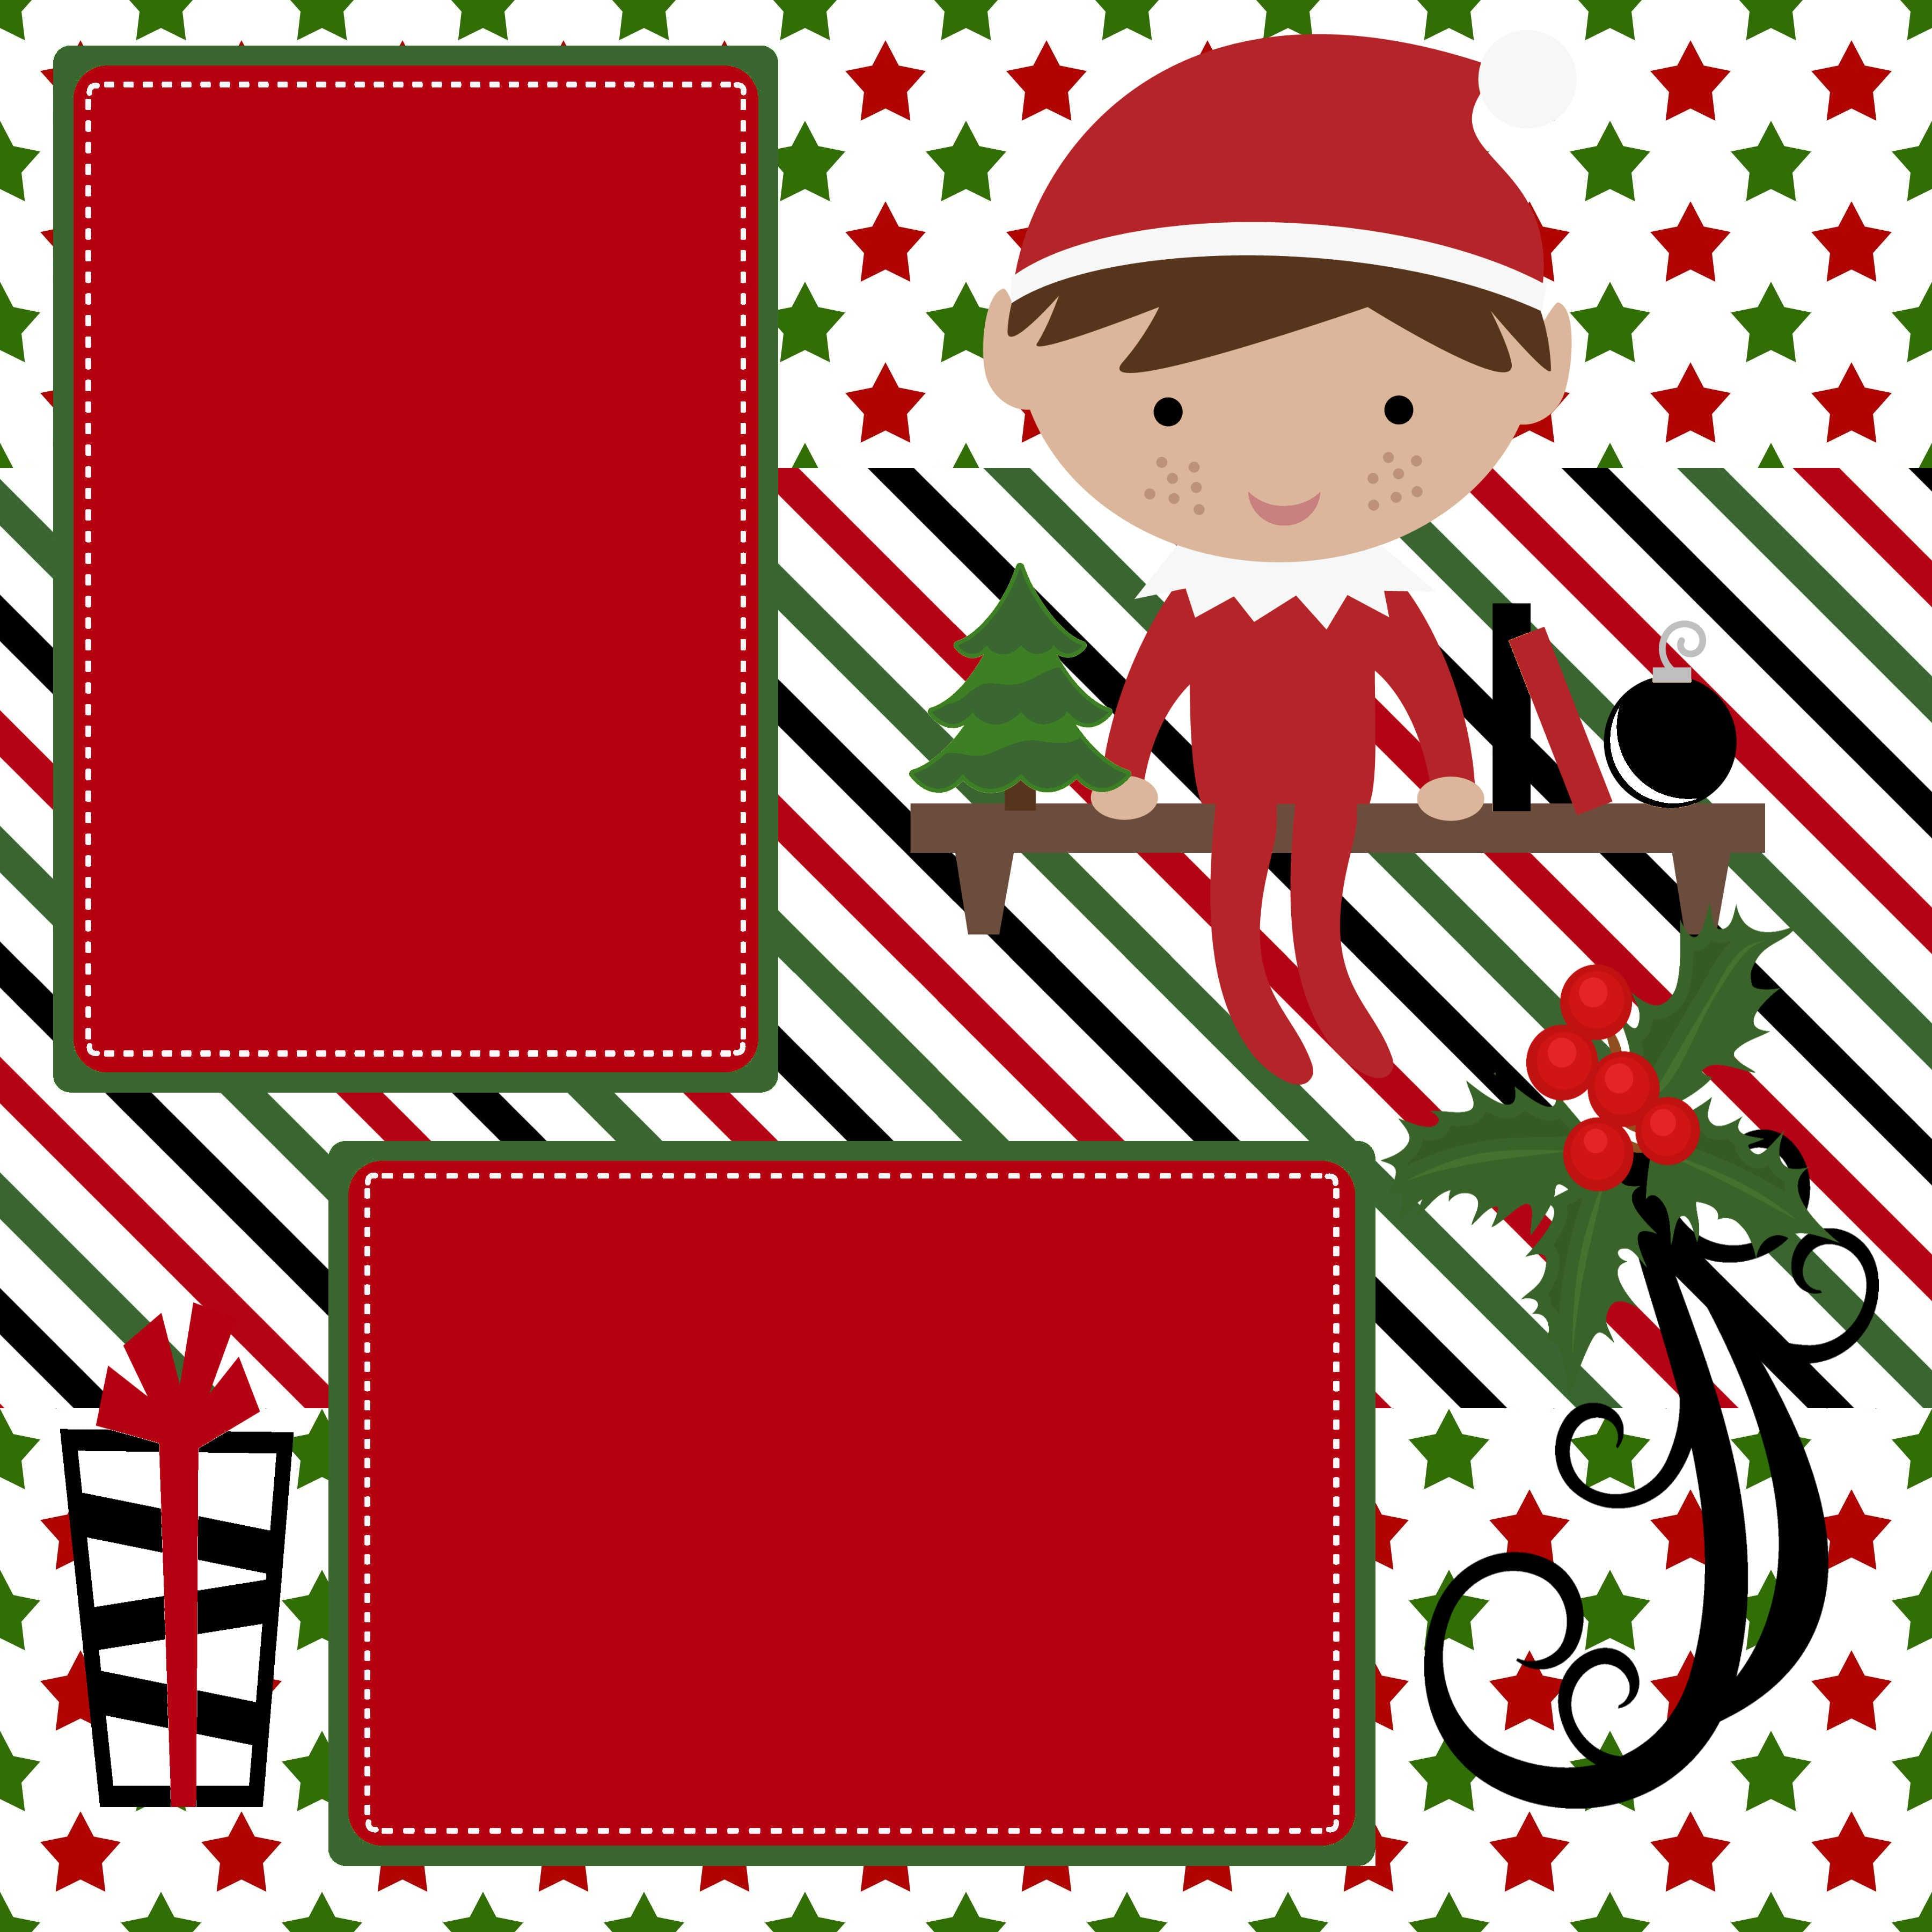 Elf Magic Christmas (2) - 12 x 12 Premade, Printed Scrapbook Pages by SSC Designs - Scrapbook Supply Companies